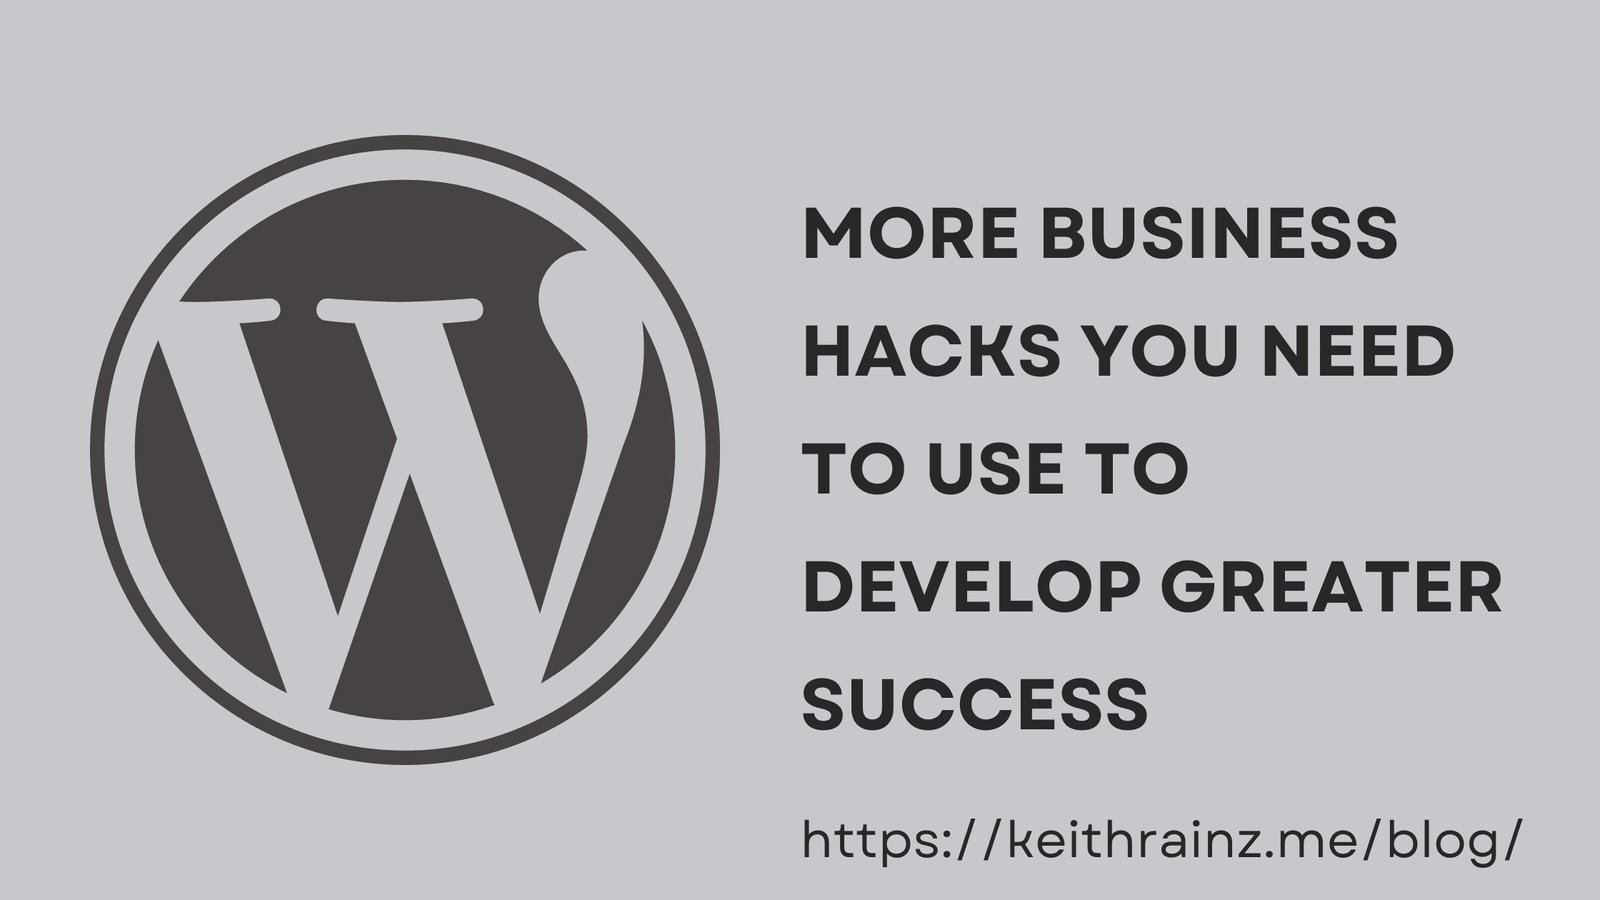 More Business Hacks You Need To Use To Develop Greater Success